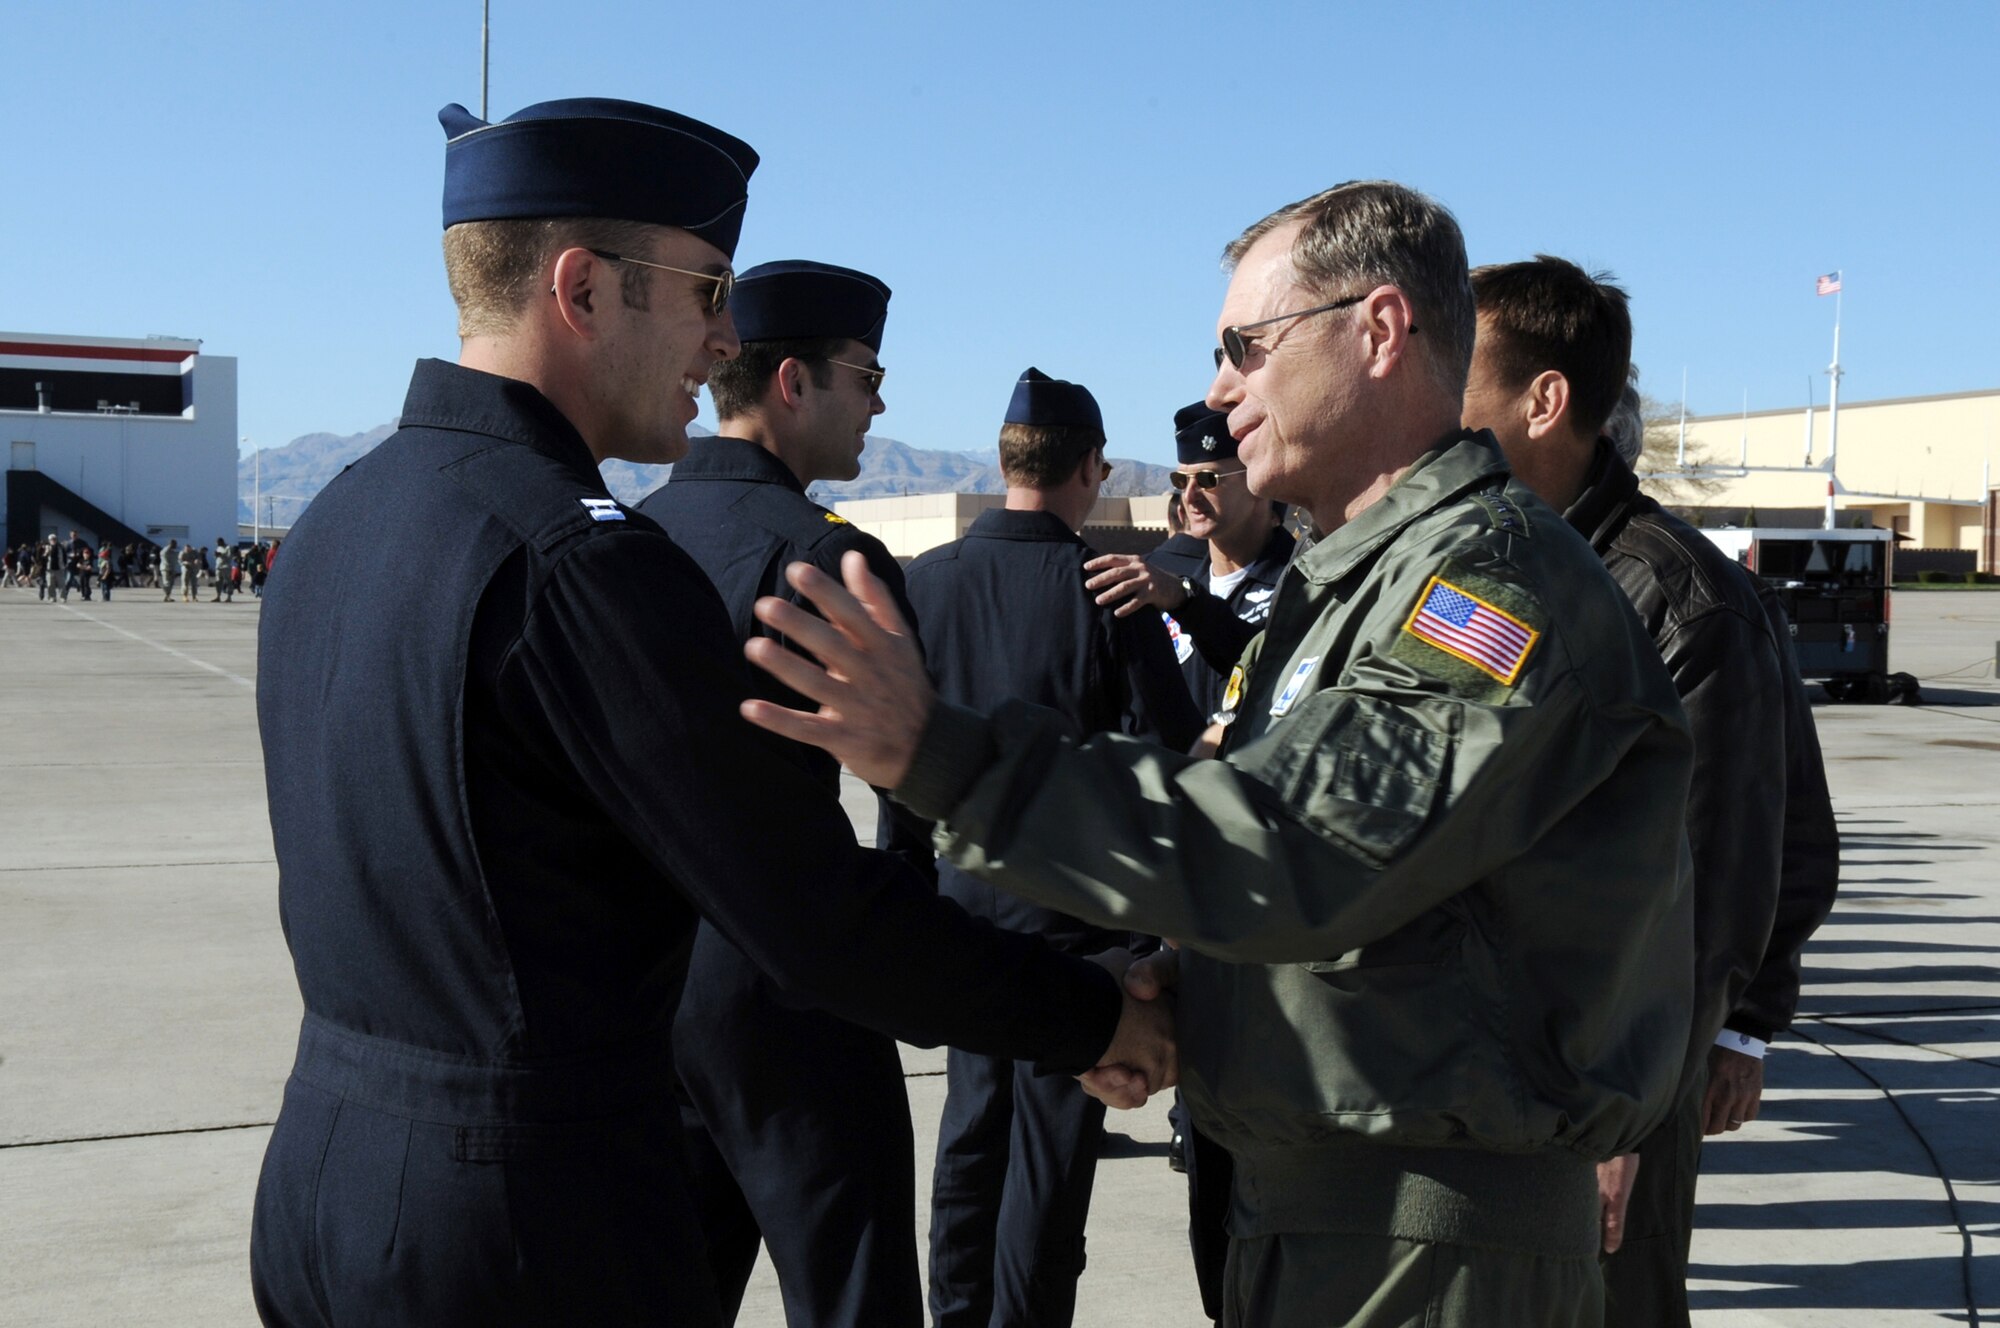 Gen. William M. Fraser III meets Capt. Paul Jelinek following the team's acceptance show March 11, 2010, at Nellis Air Force Base, Nev. General Fraser is the commander of Air Combat Command, and Captain Jelinek is the Air Force Air Demonstration Squadron "Thunderbirds" opposing solo pilot. (U.S. Air Force photo/Staff Sgt. Richard Rose)